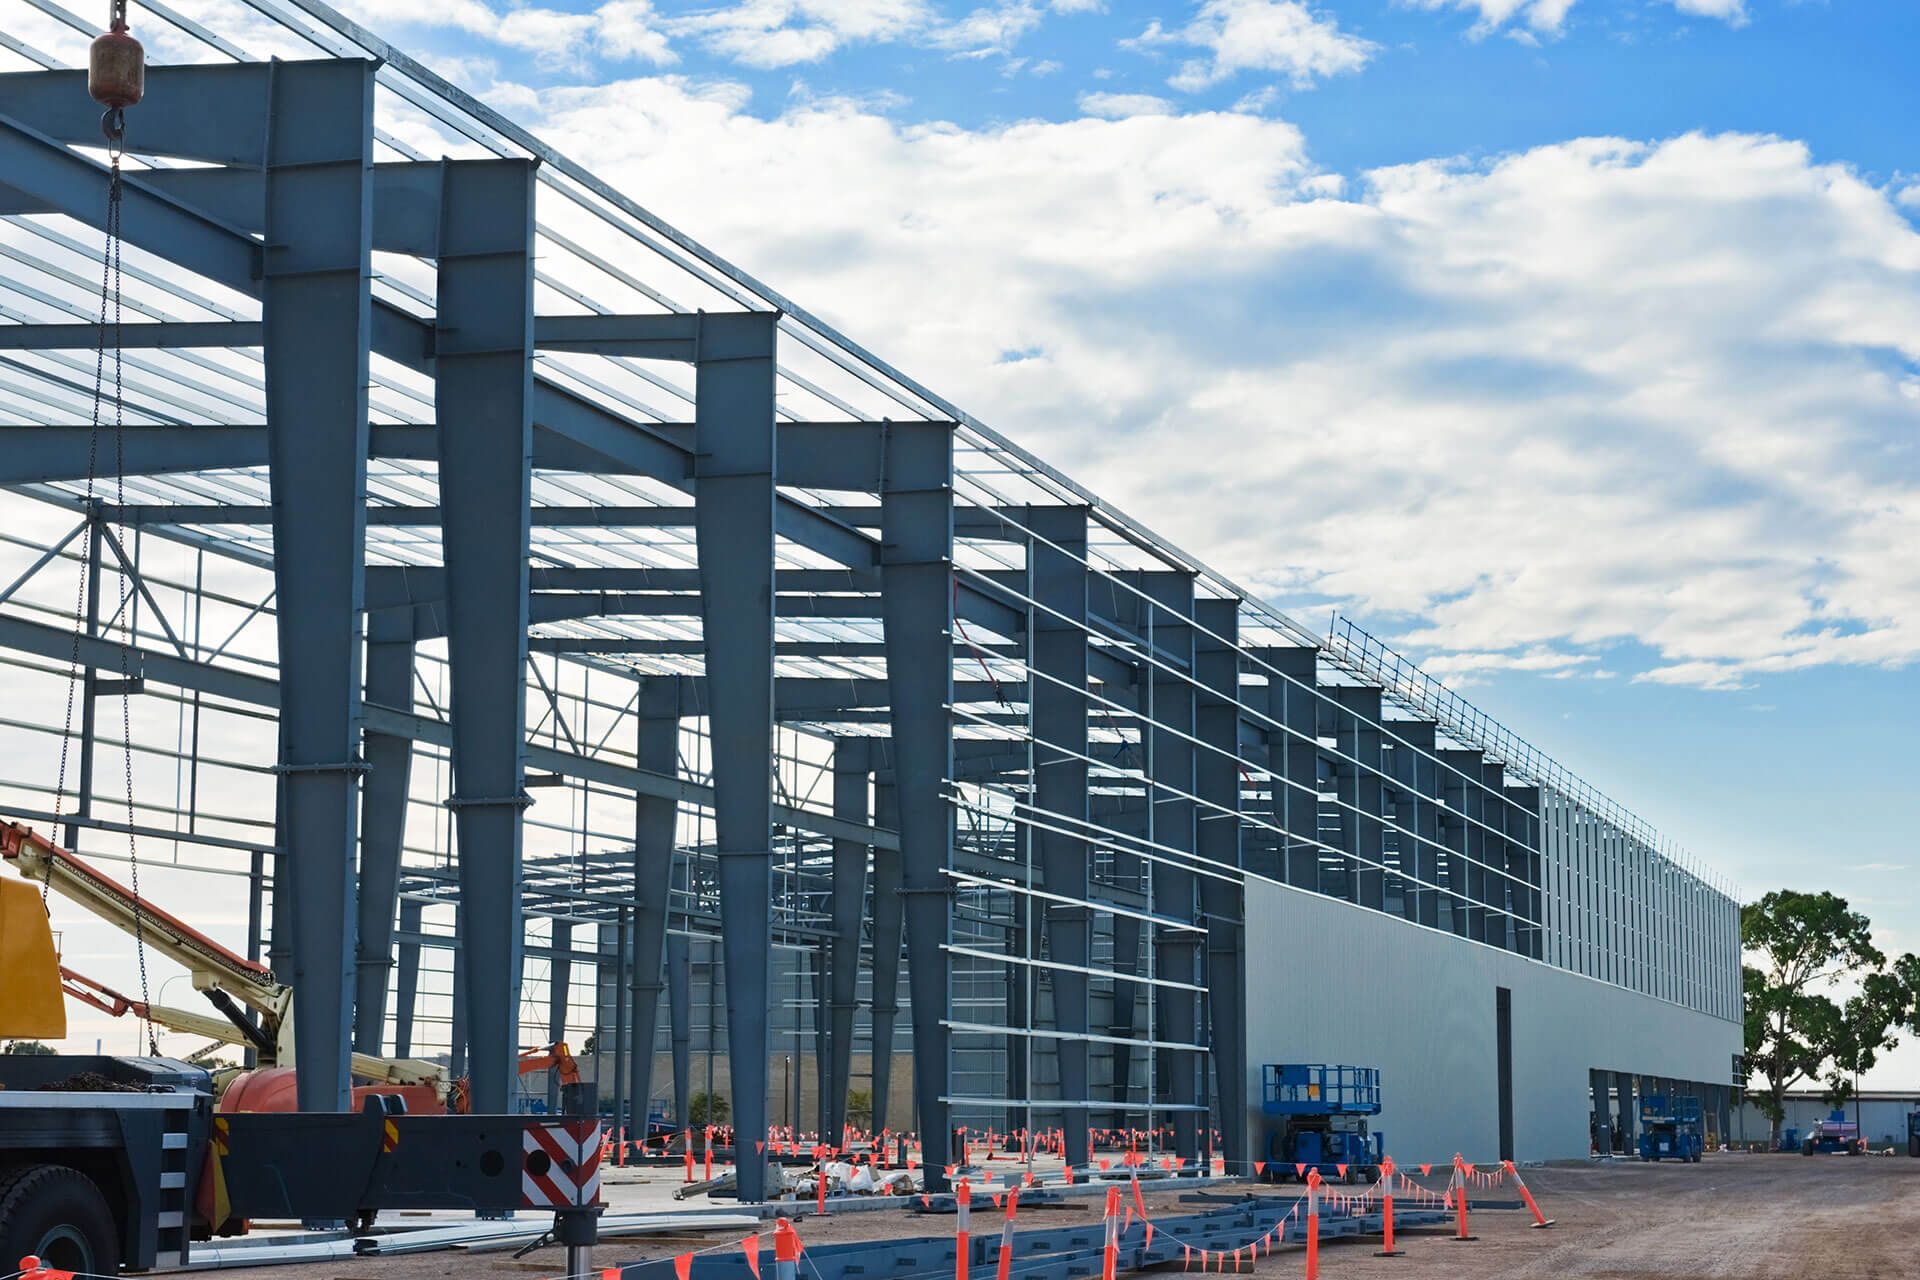 Industrial Real Estate: Opportunities and Challenges